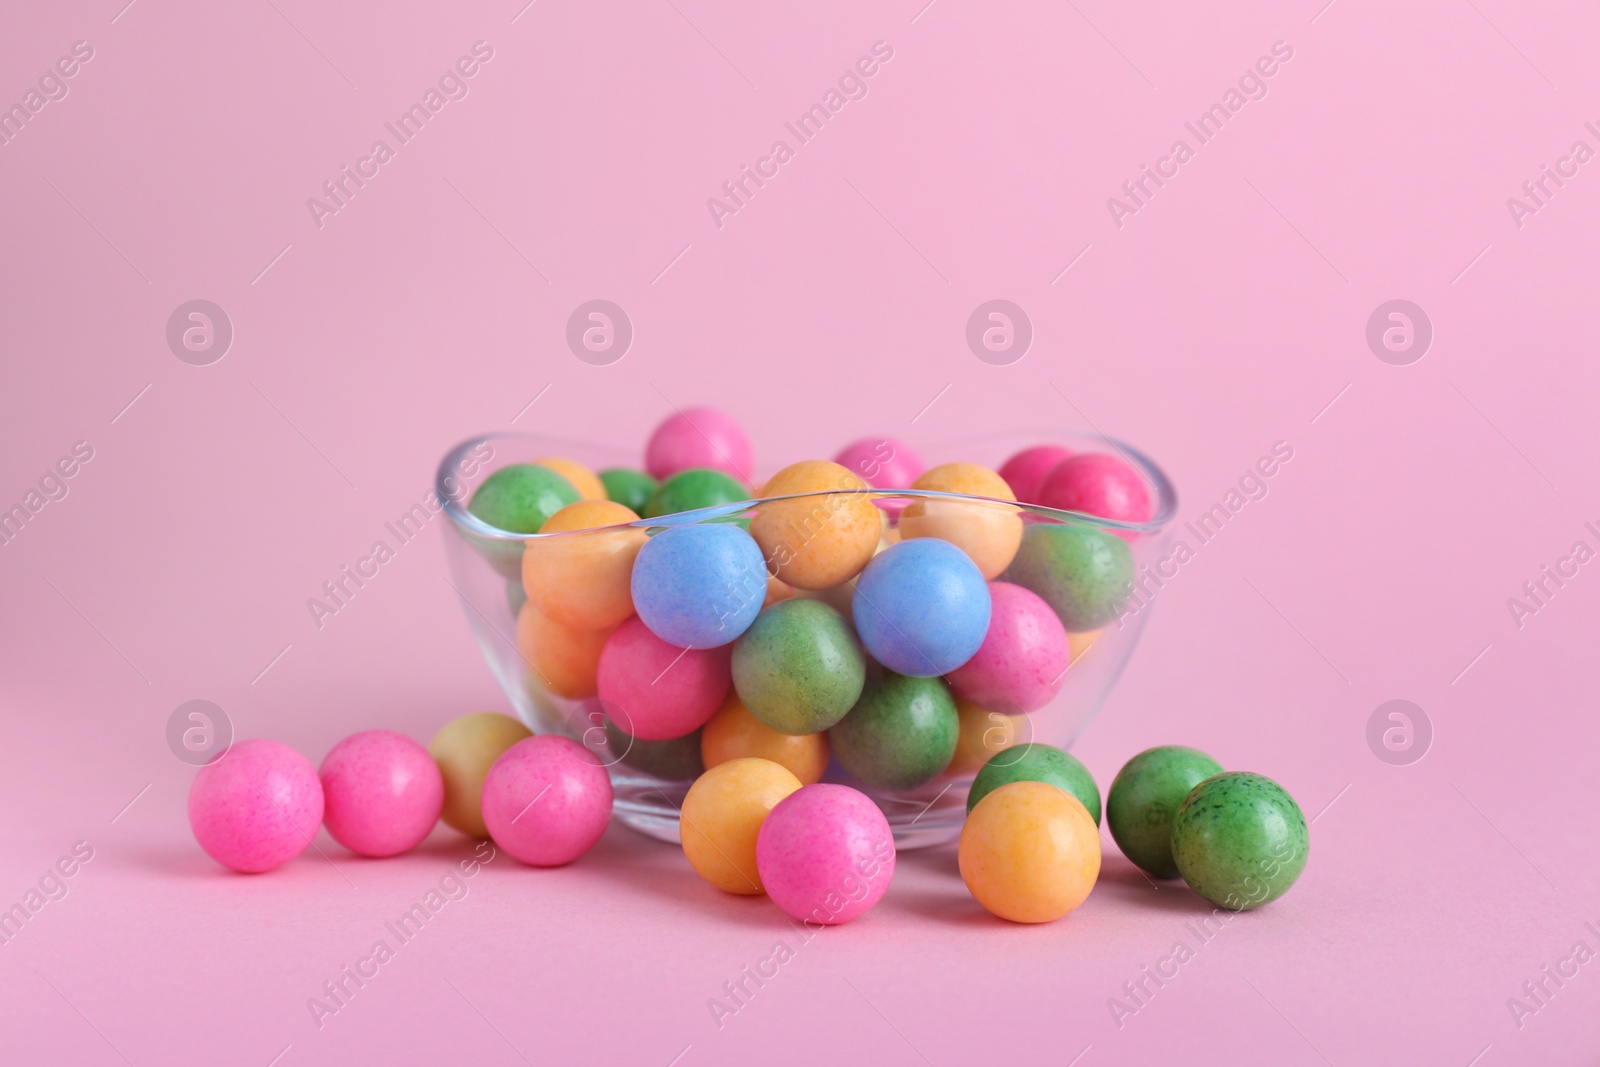 Photo of Bowl with many bright gumballs on pink background